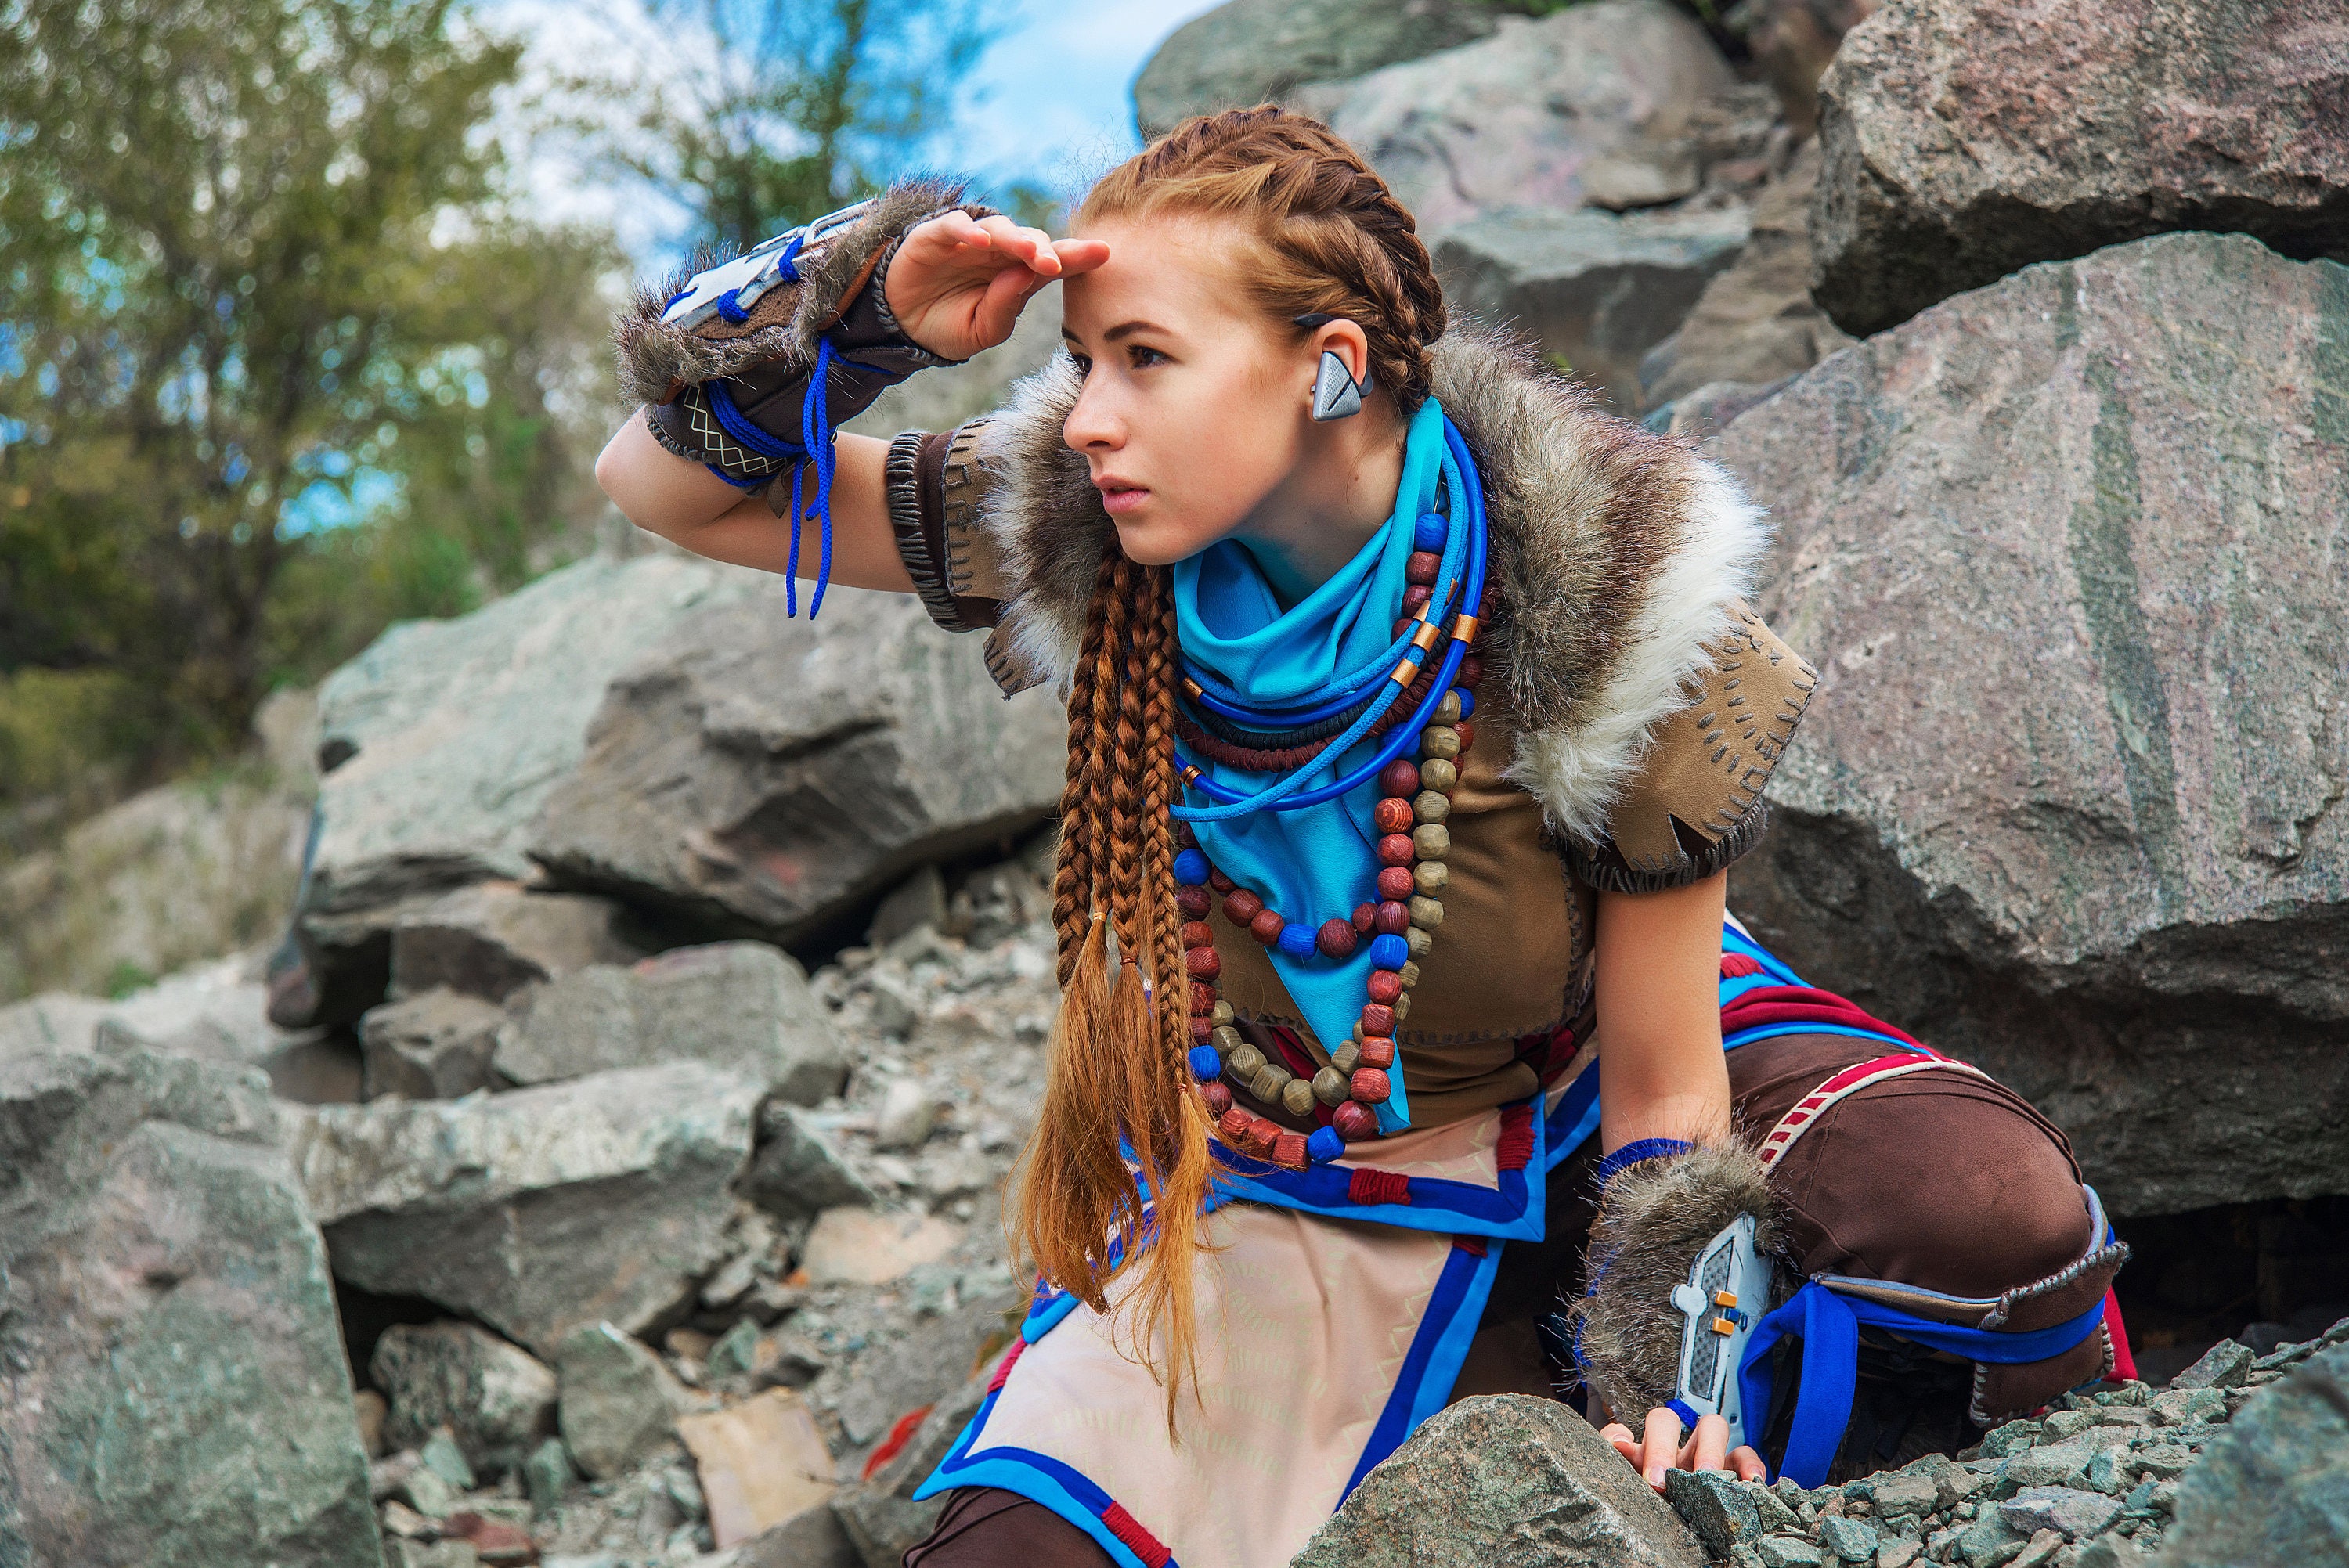 Stunning Cosplay of Aloy From HORIZON ZERO DAWN Created by